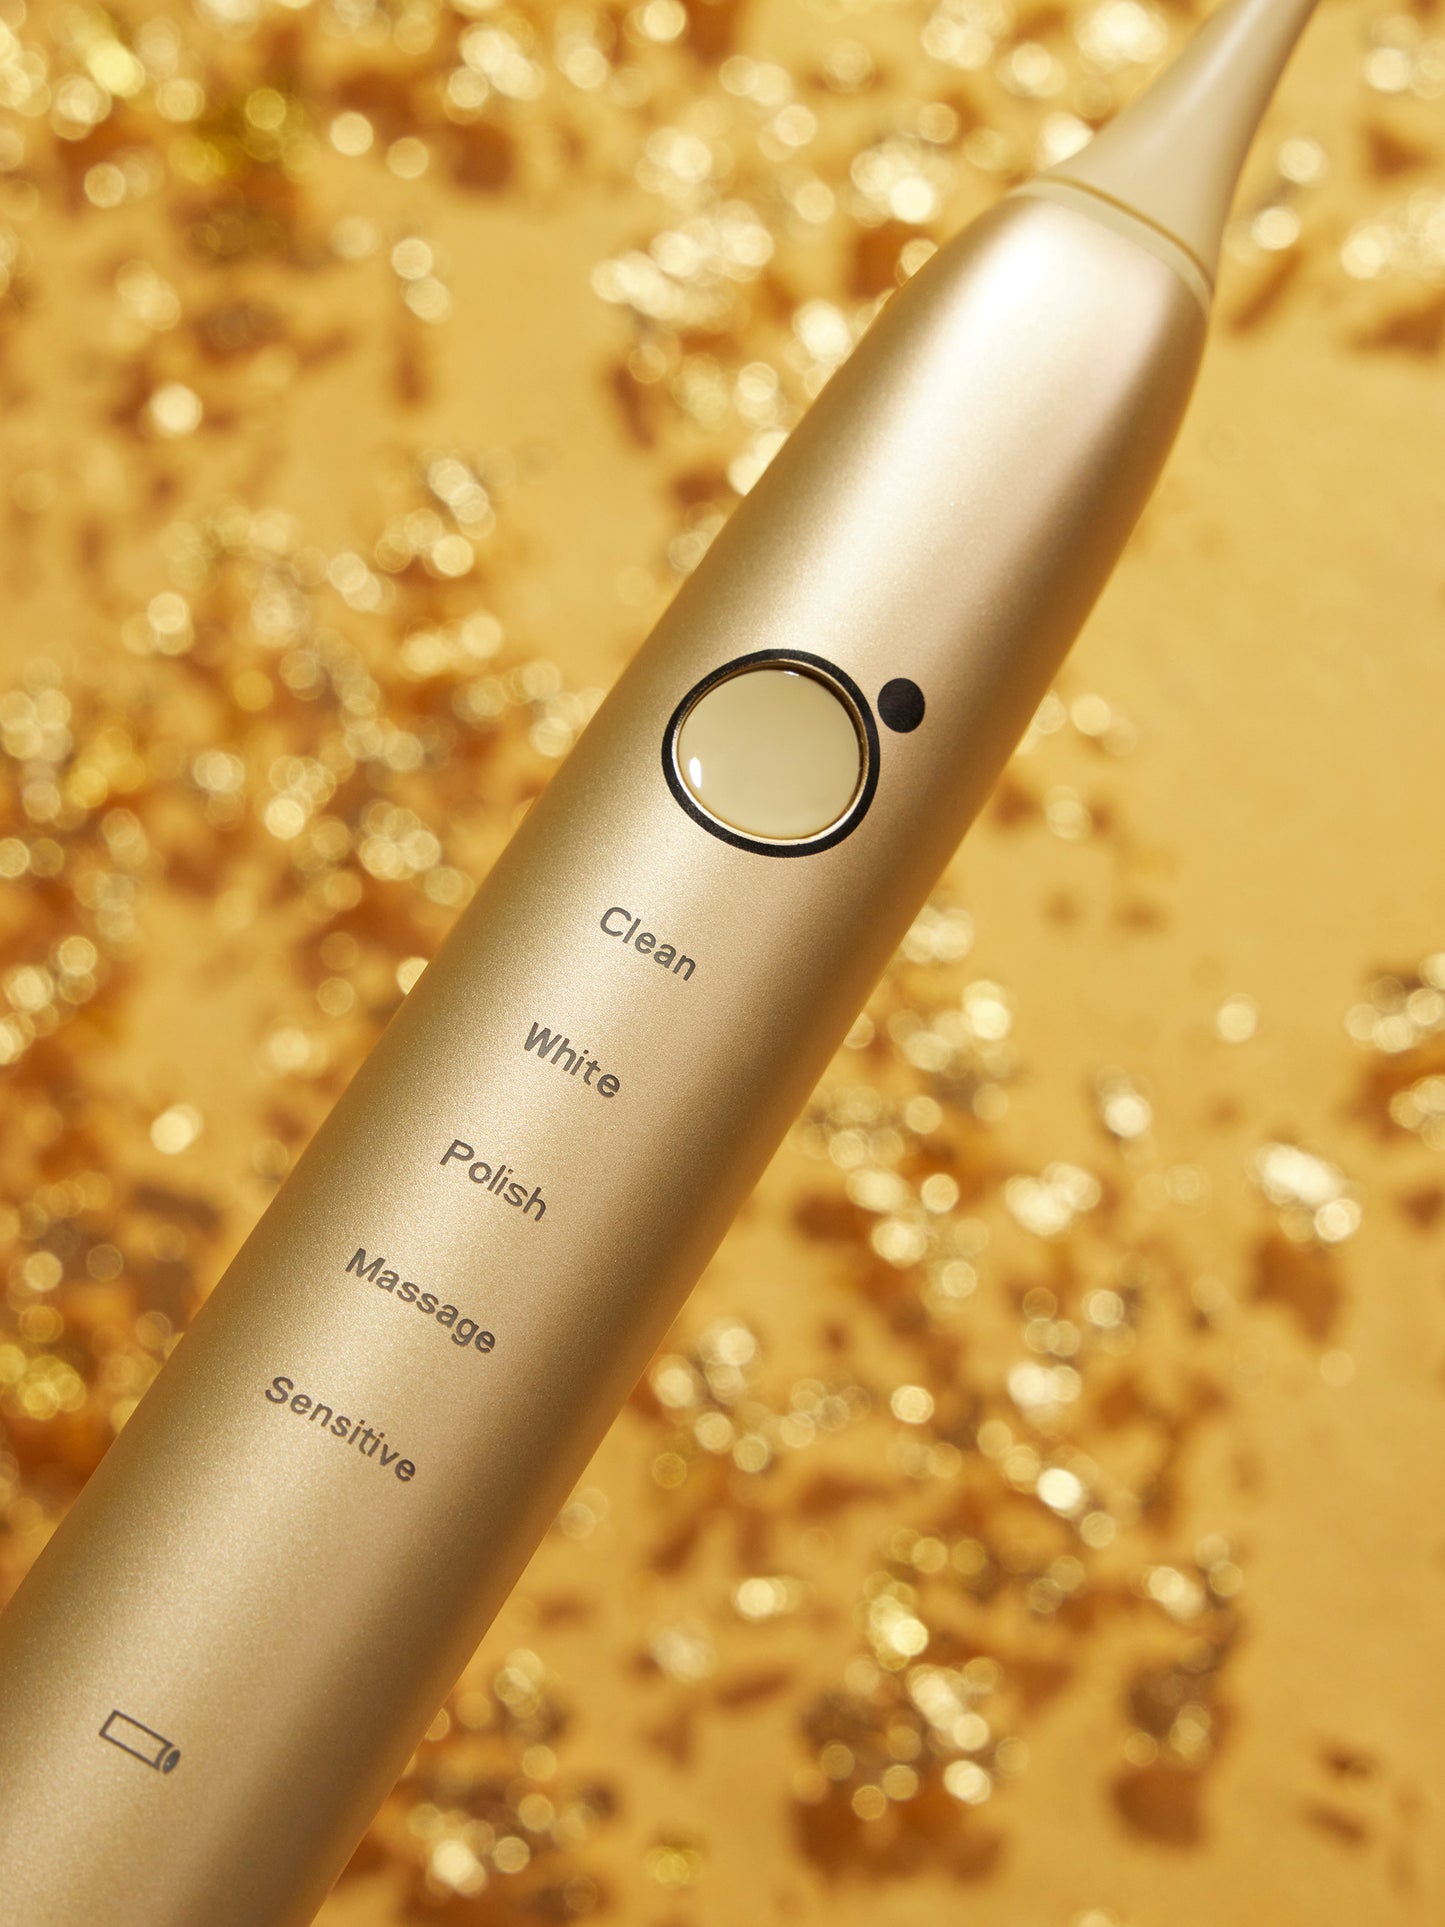 The Gold Electric Toothbrush